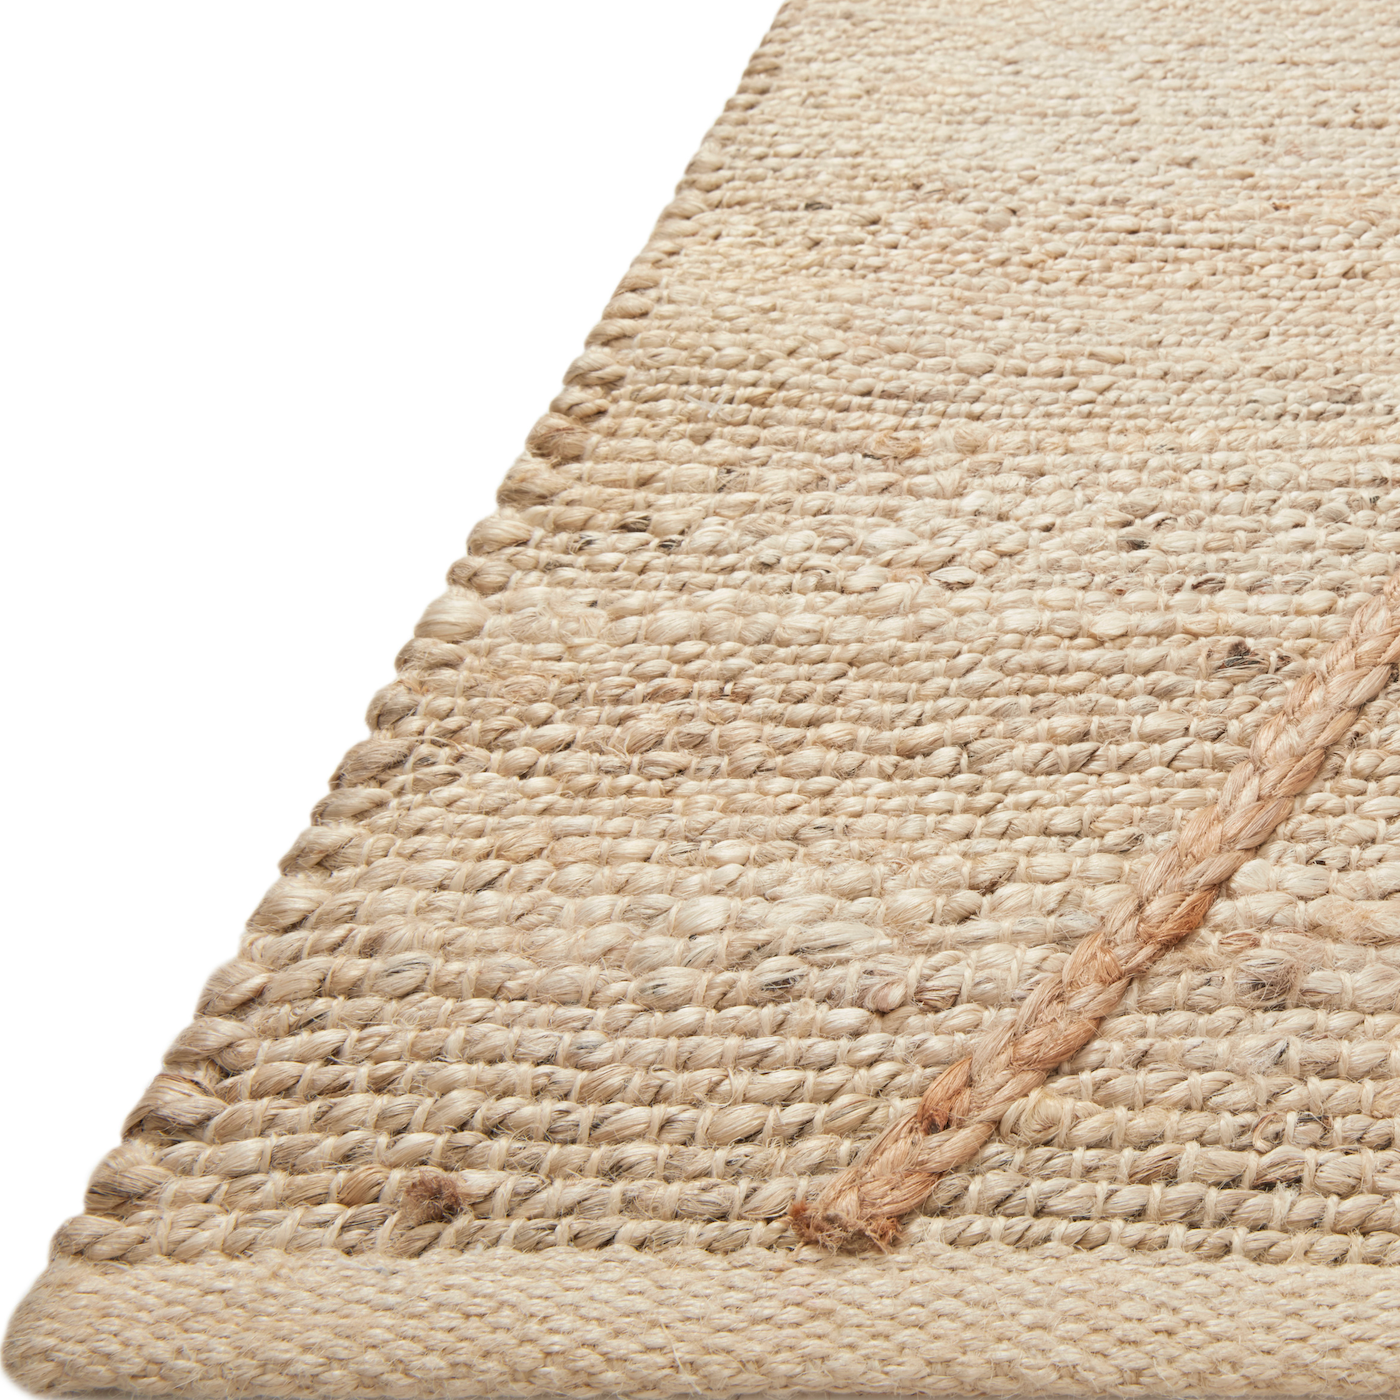 A tonal approach to Moroccan-inspired rugs, the Bodhi Ivory / Natural BOD-01 rug from Loloi is hand-woven of 100% jute. This rug features linear and braided details, creating natural variations that make a subtle yet striking statement for an entryway, living room, hallway or kitchen runner, or dining room. Amethyst Home provides interior design, new construction, custom furniture, and rugs for the Kansas City metro area.